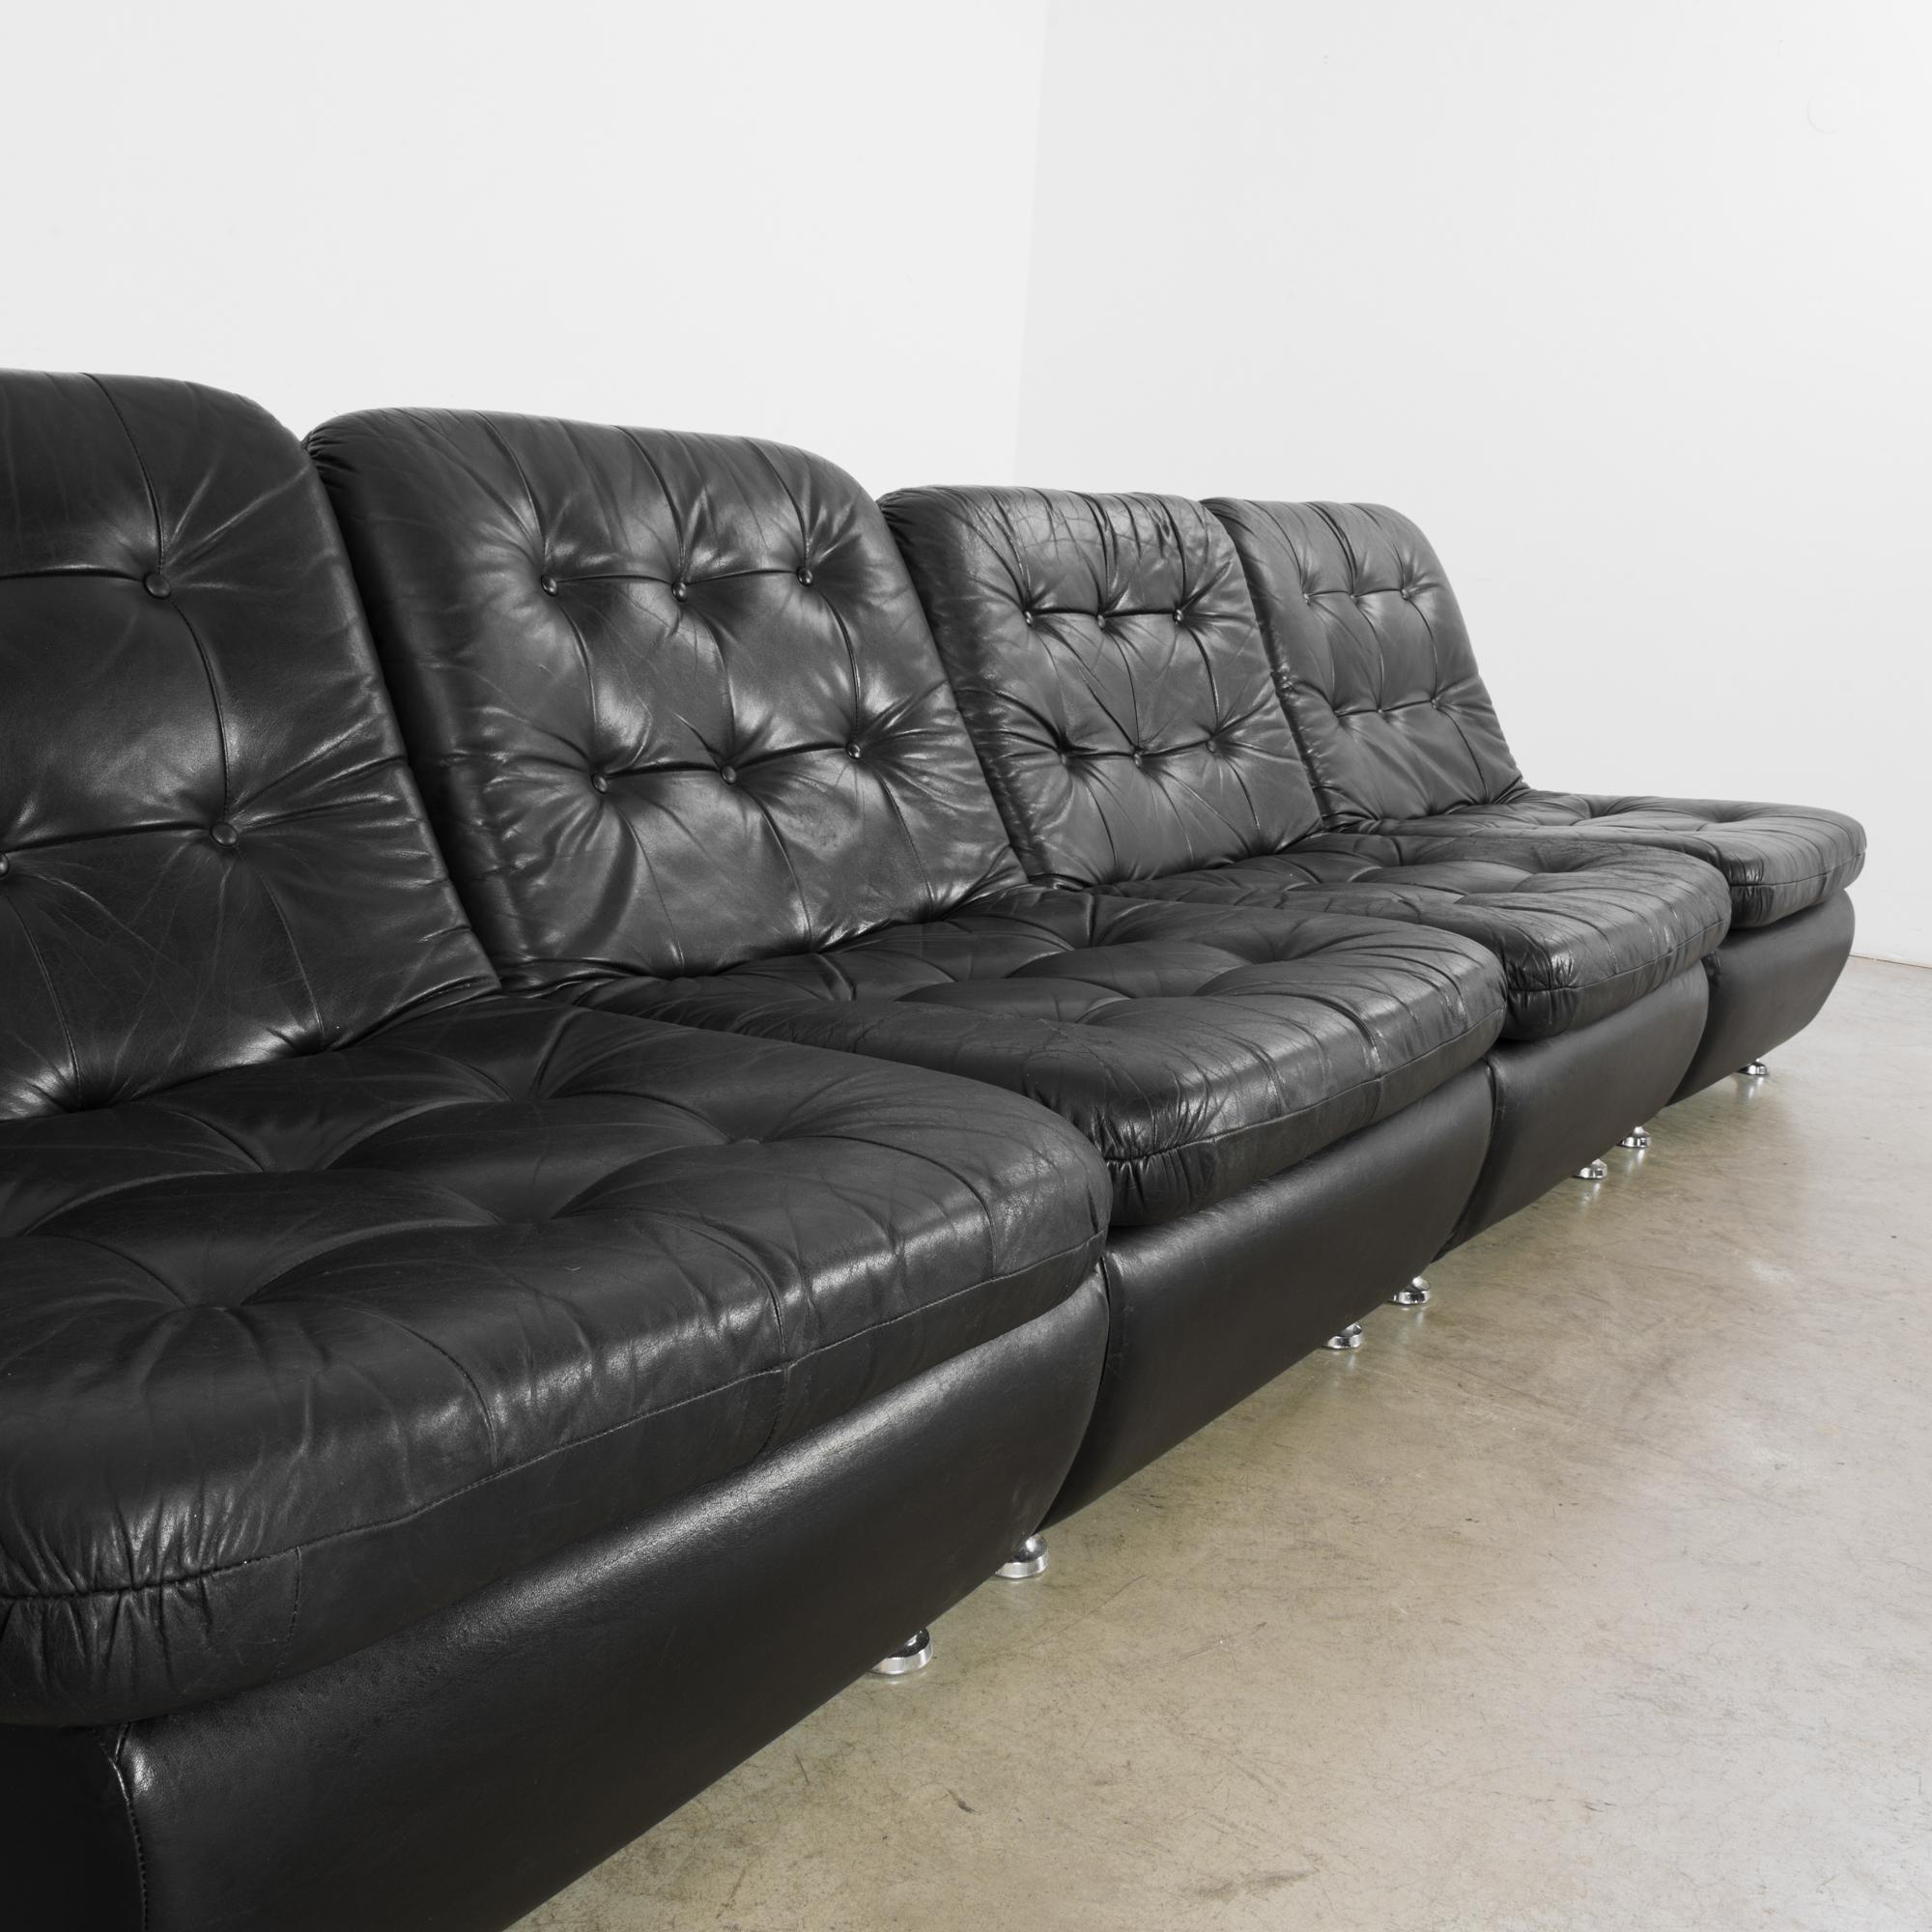 This four-piece black leather sofa was made in Denmark, circa 1970. Its versatility and use of top-quality leather make this an exemplar of Danish Modern design. The individual chairs can be arranged based on your desired configuration, and the